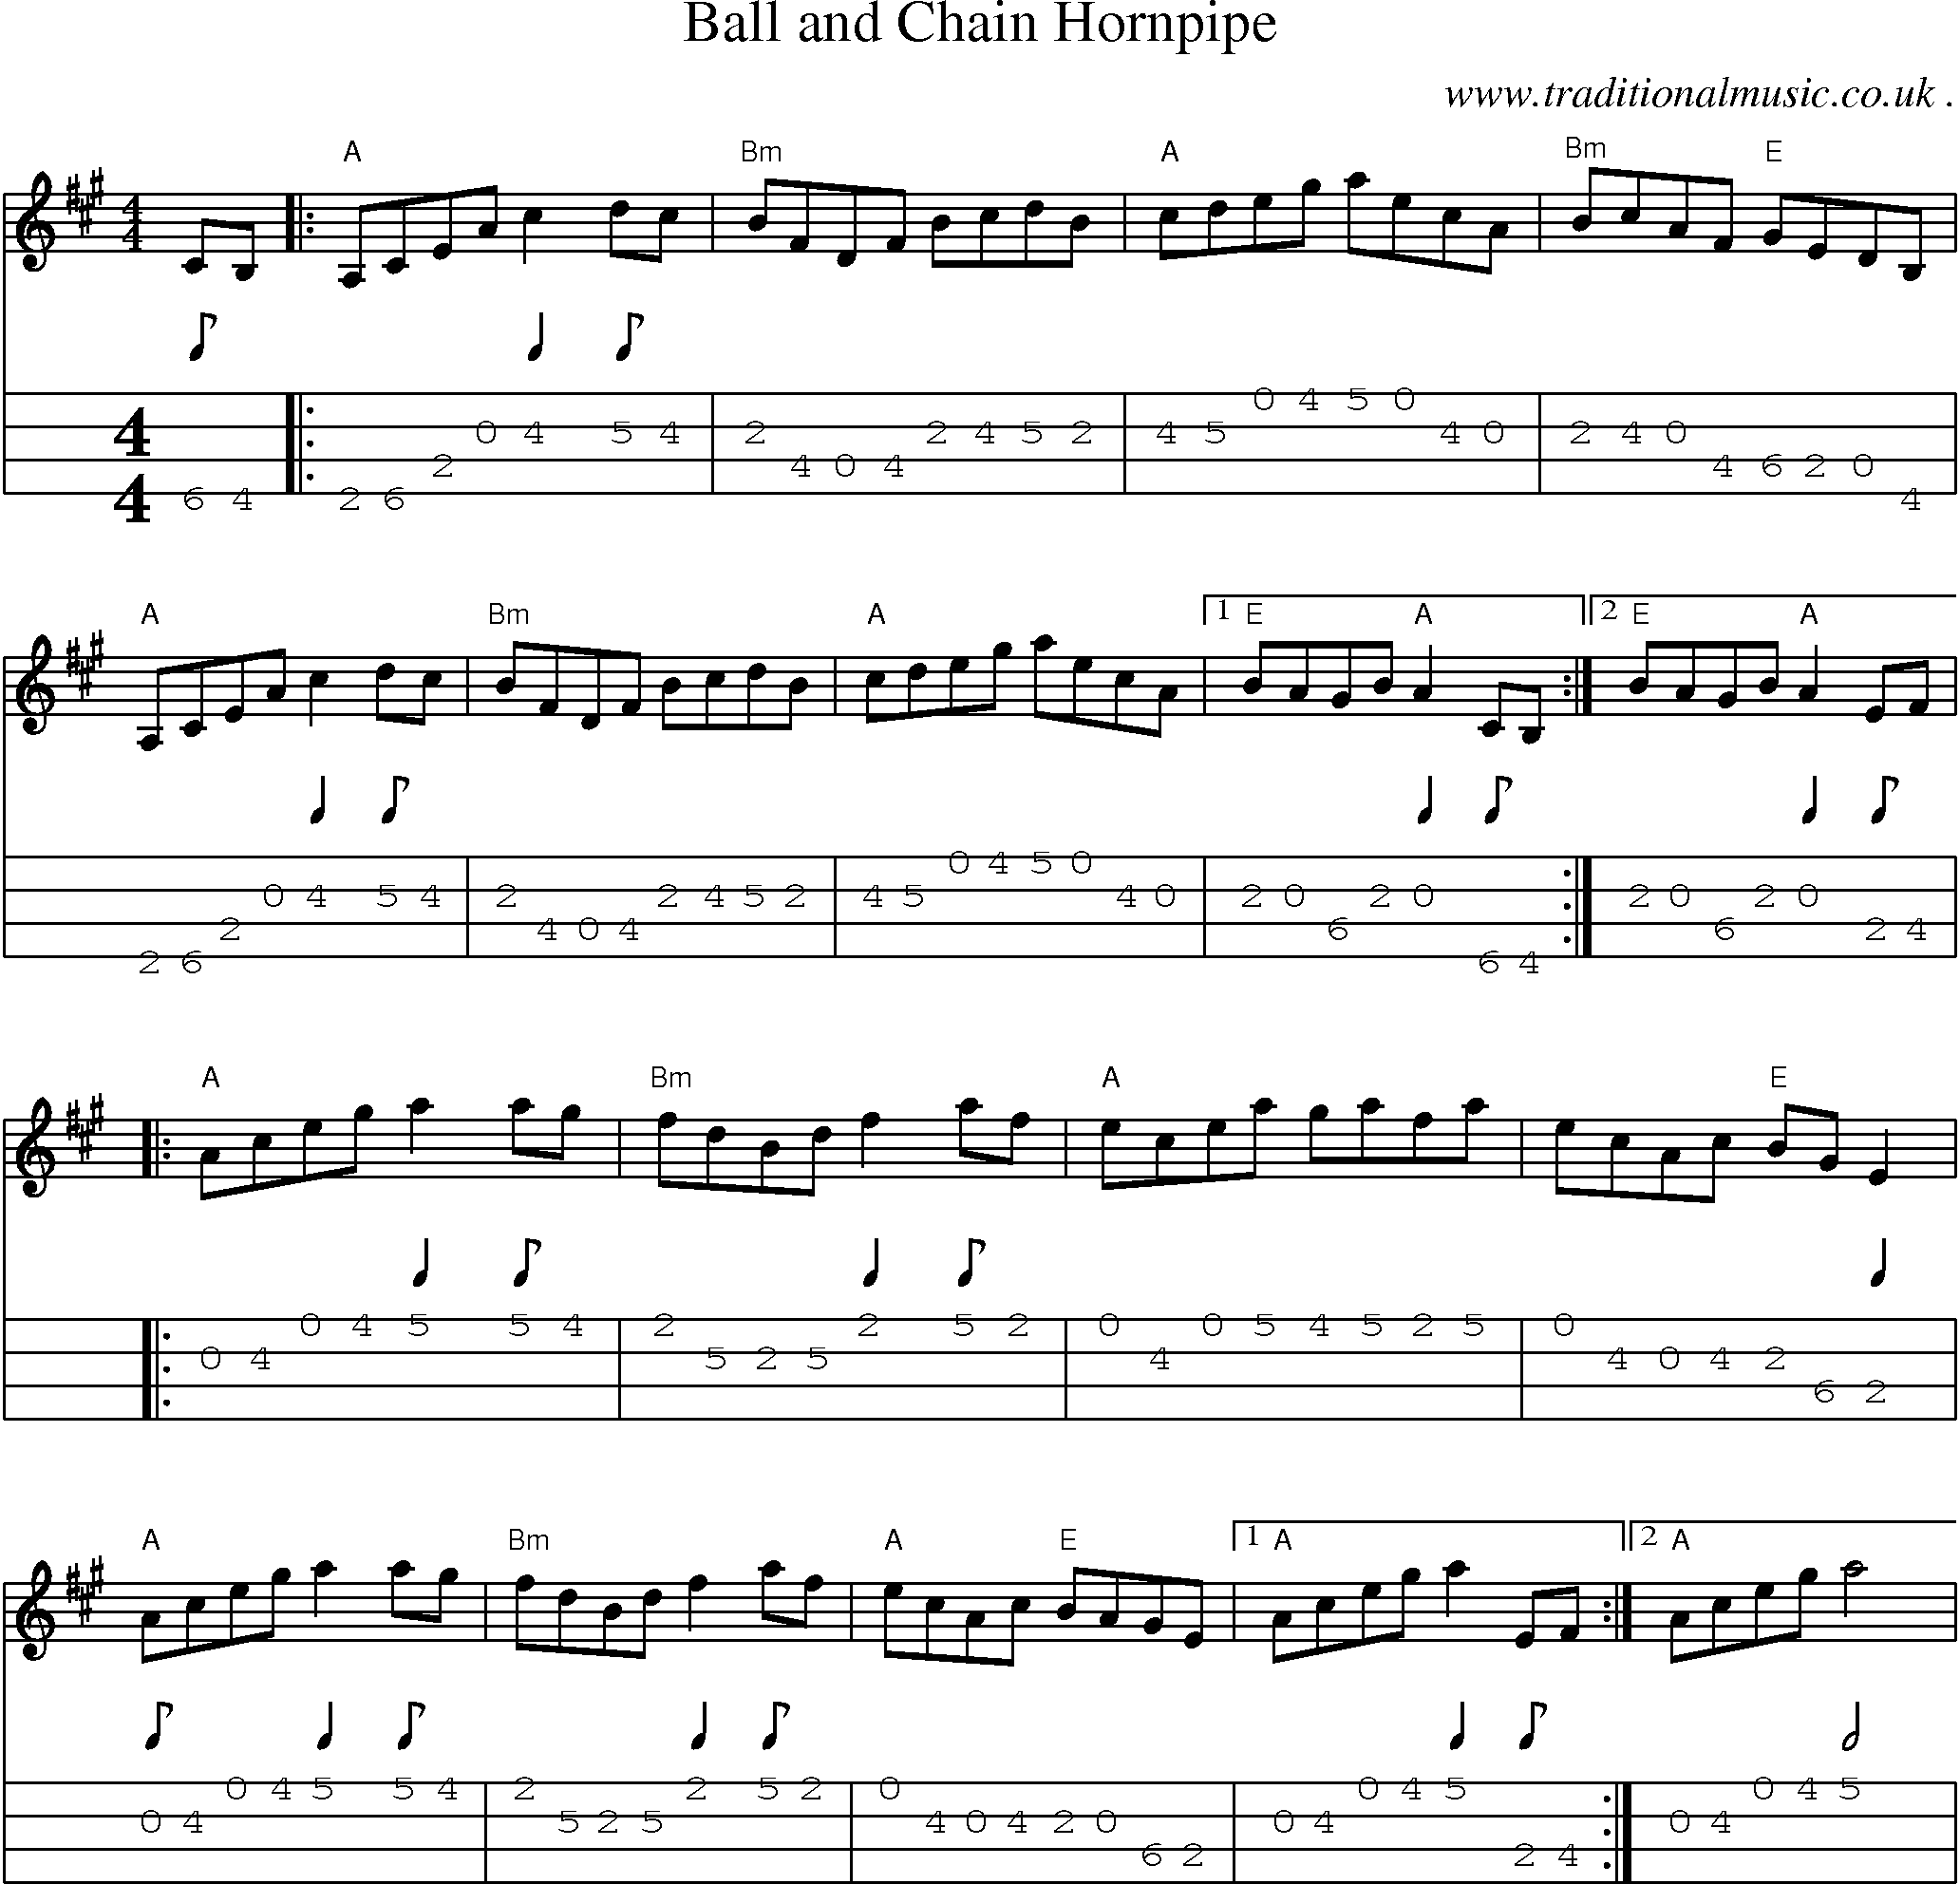 Music Score and Guitar Tabs for Ball And Chain Hornpipe